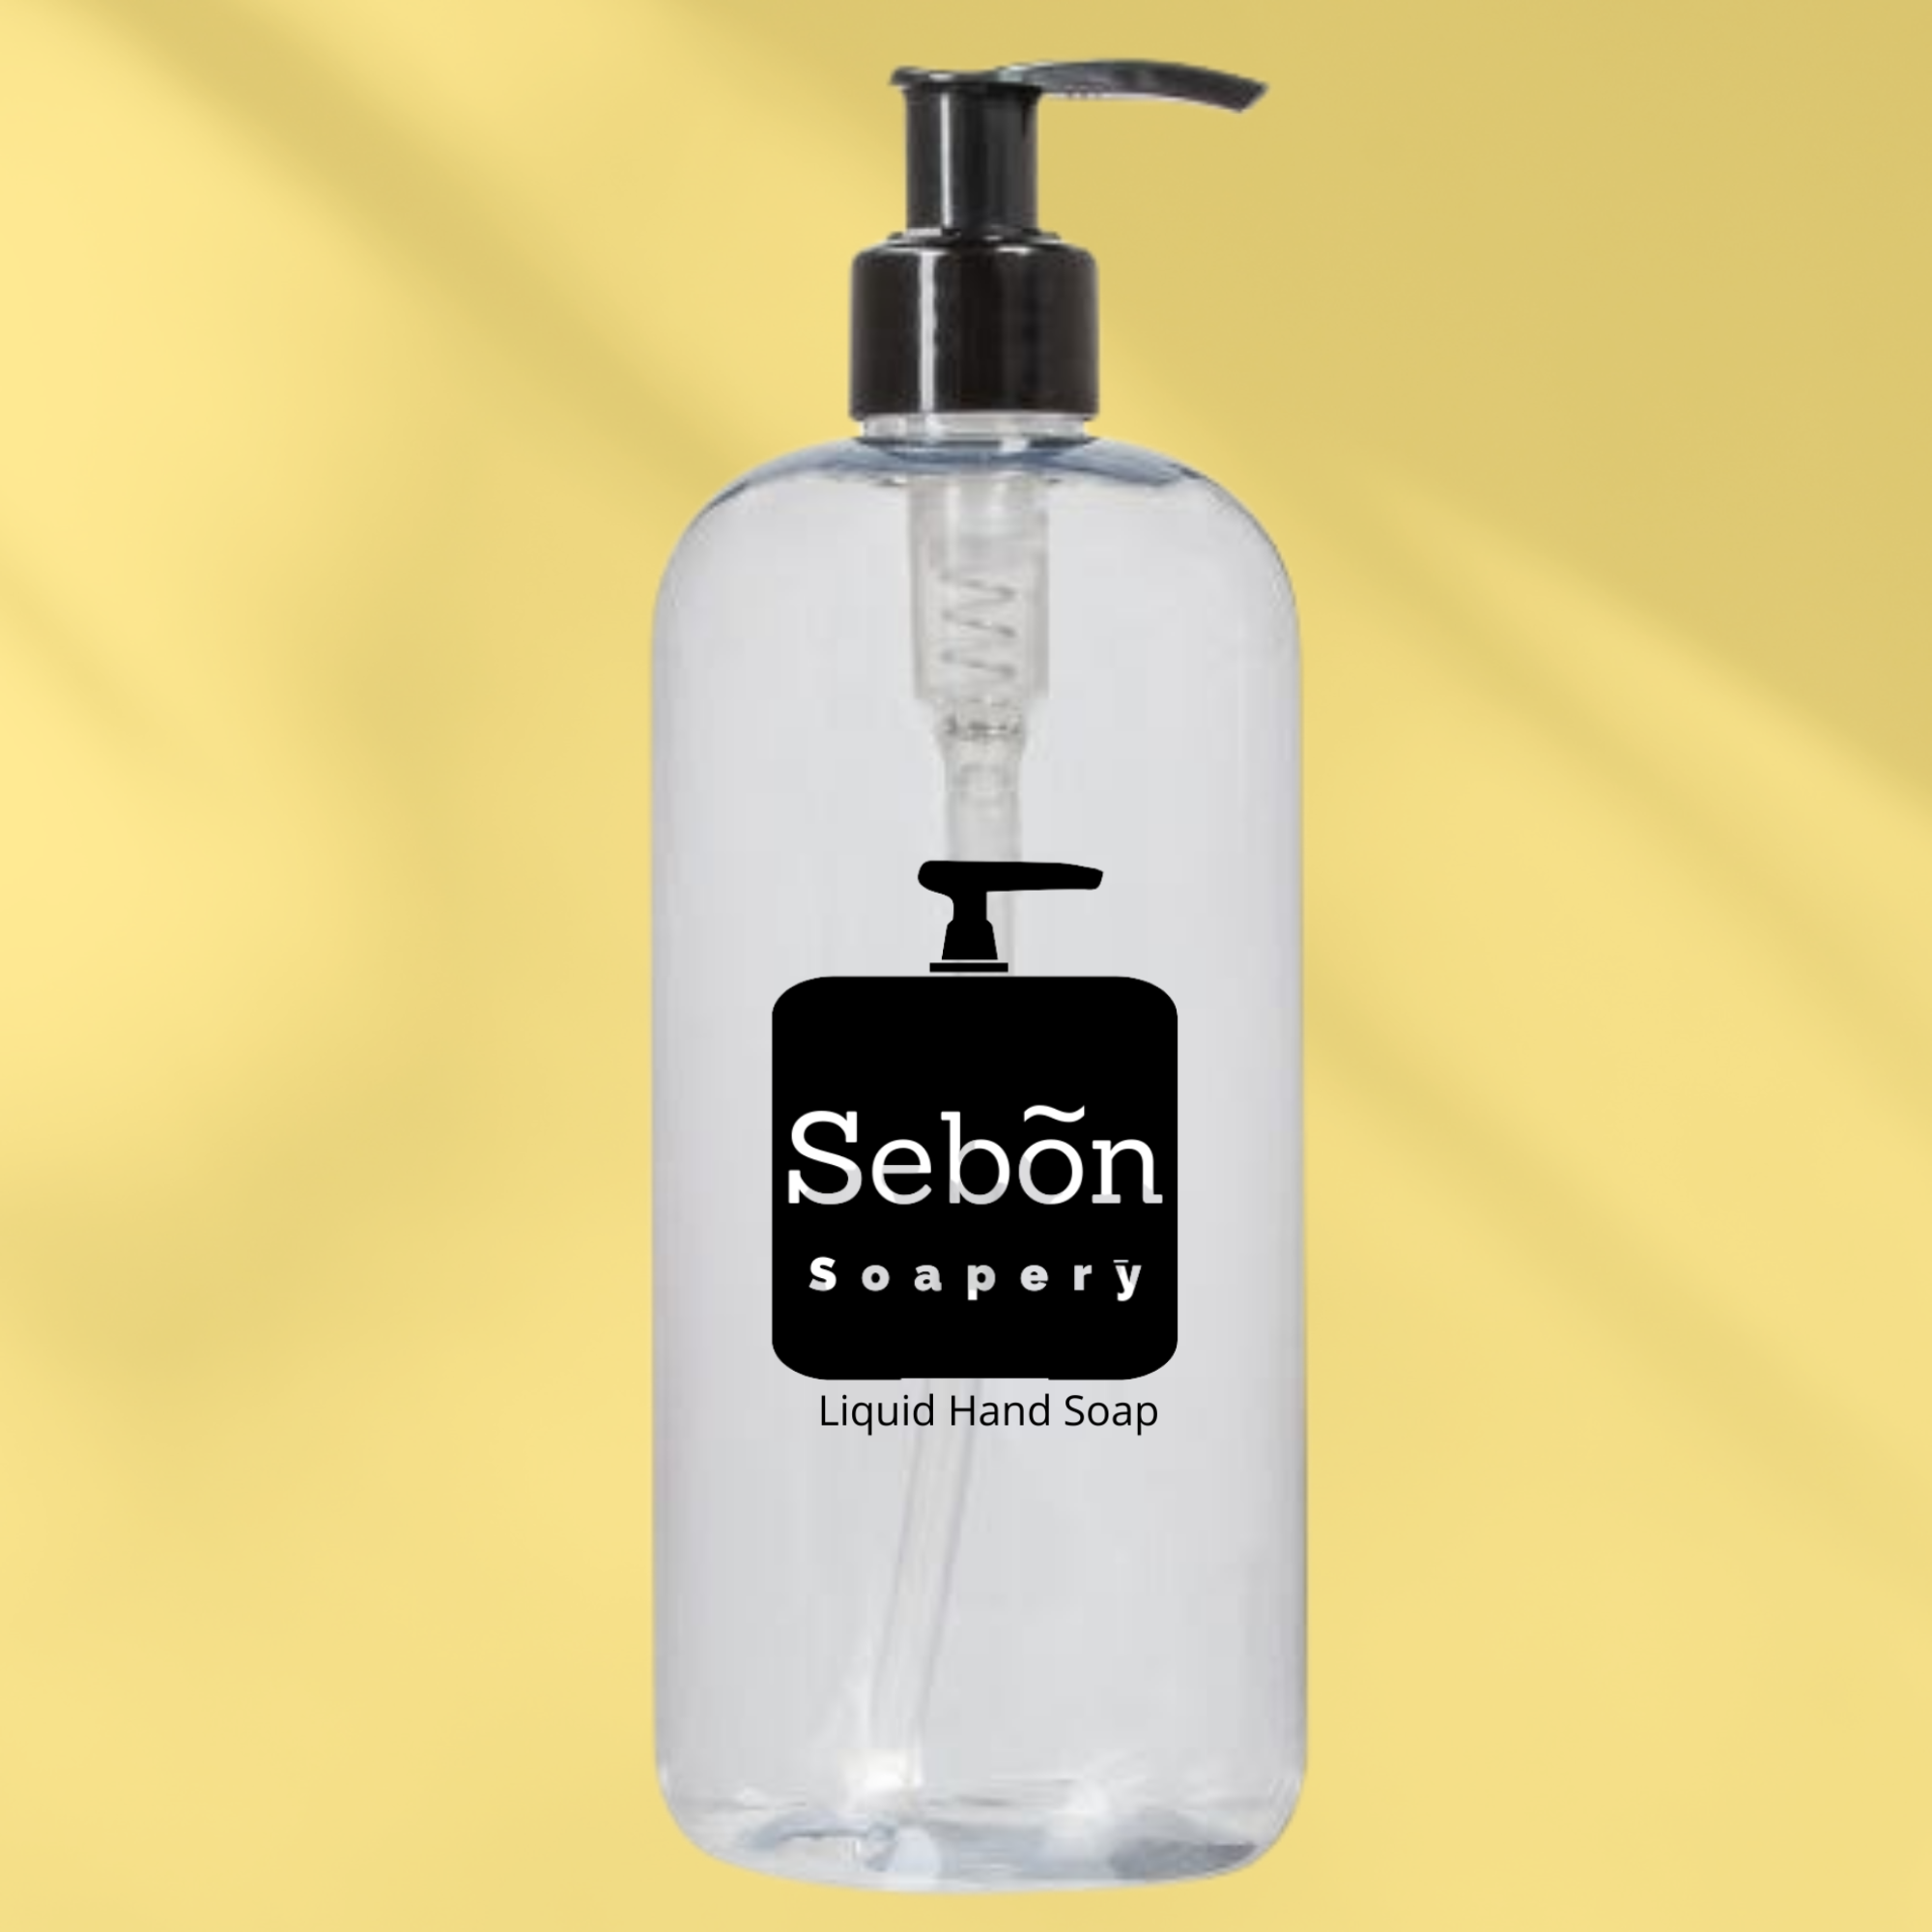 Sebon Grapefruit & Quince Scented Liquid Hand Soap with Olive Oil